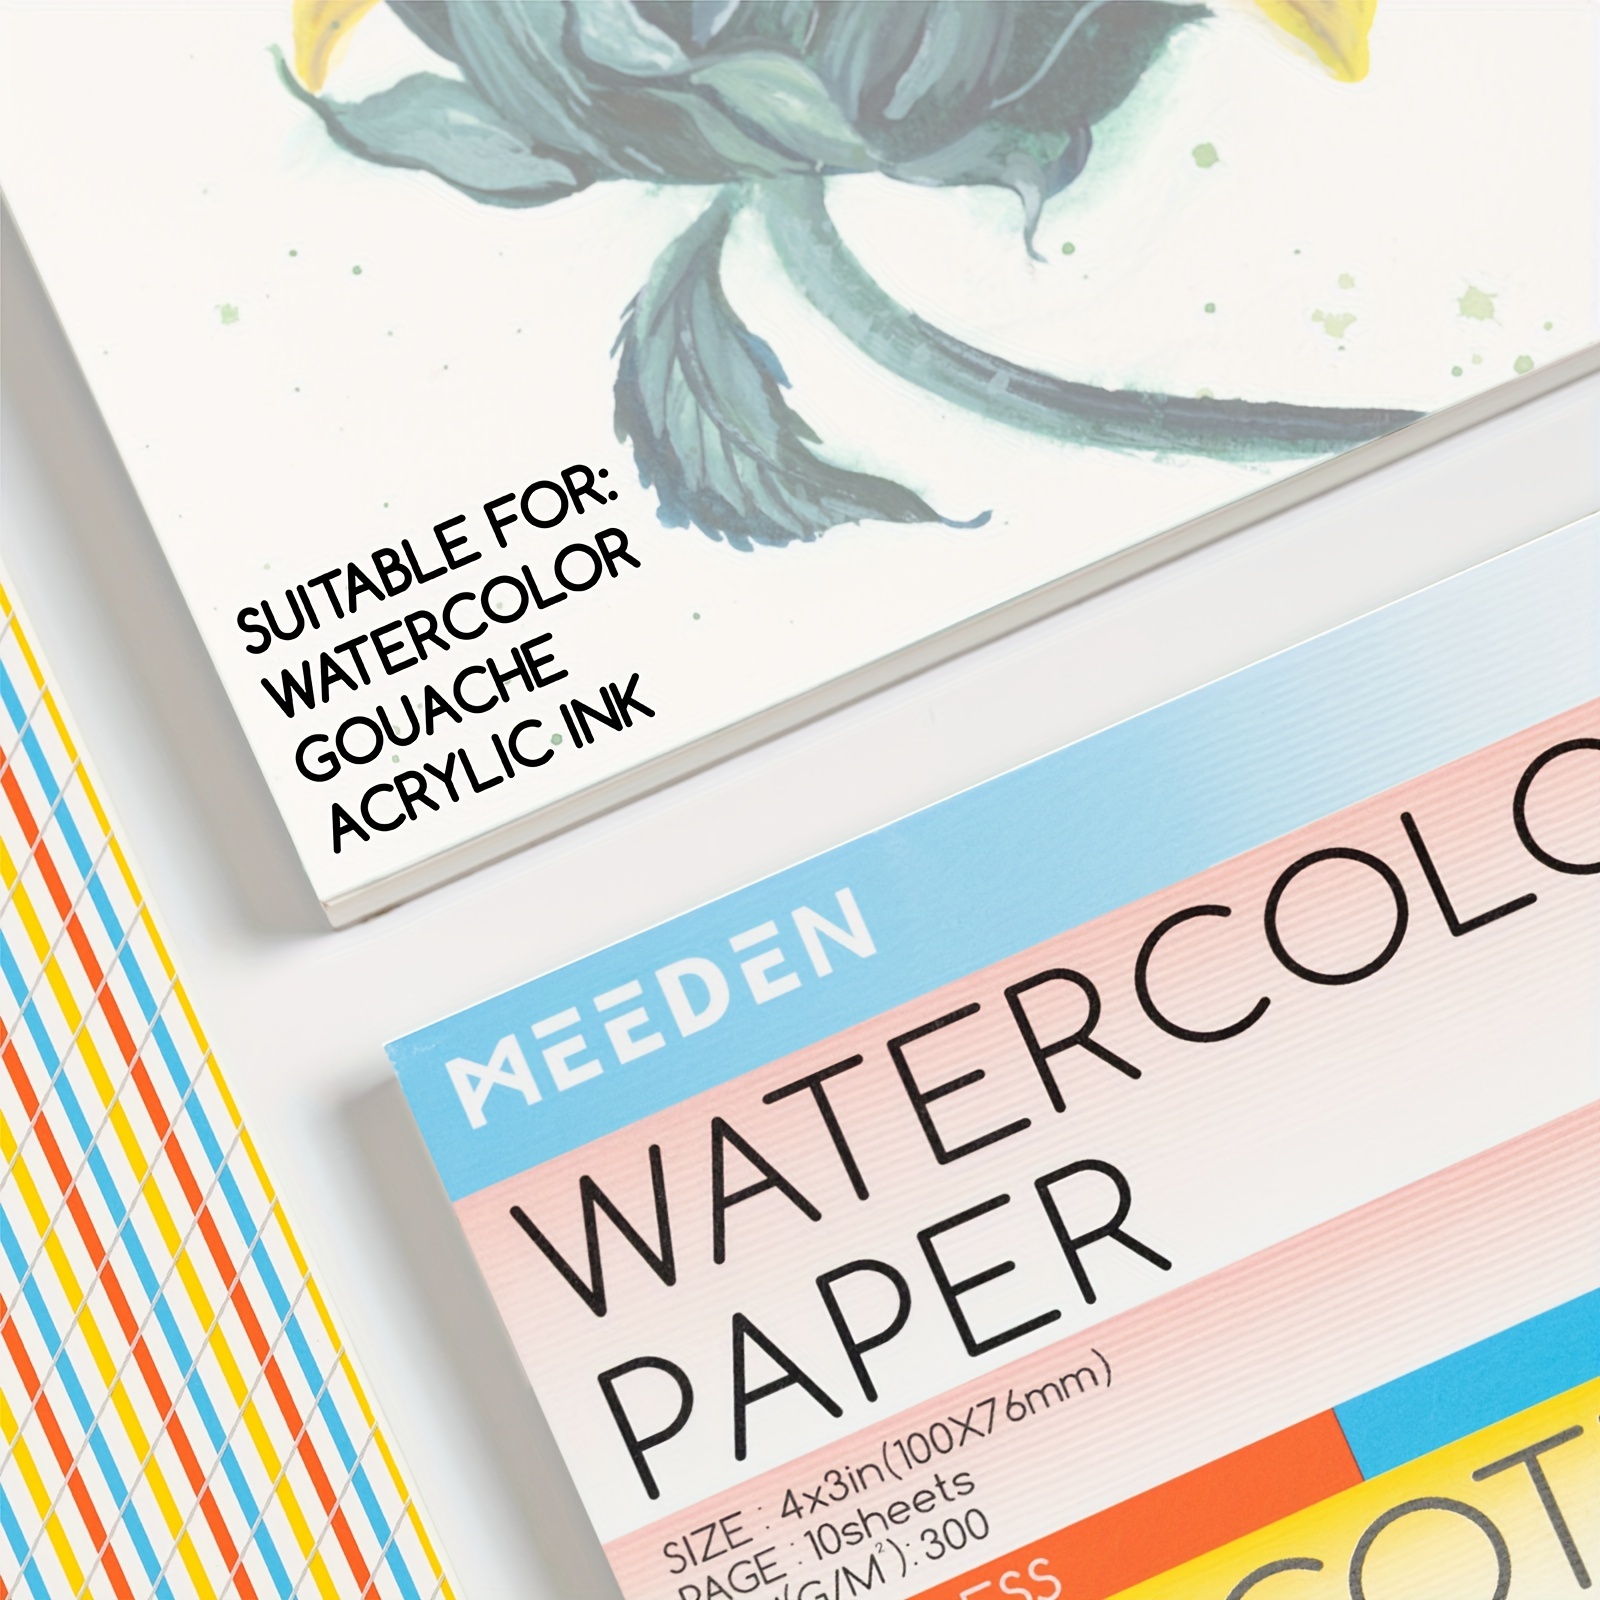 MEEDEN Watercolor Paper Block, 100% Cotton Watercolor Paper Pad of 20  Sheets, 140lb/300gsm, Acid-Free Art Paper for Watercolor, Gouache, Ink and  More, 10 x 7 …